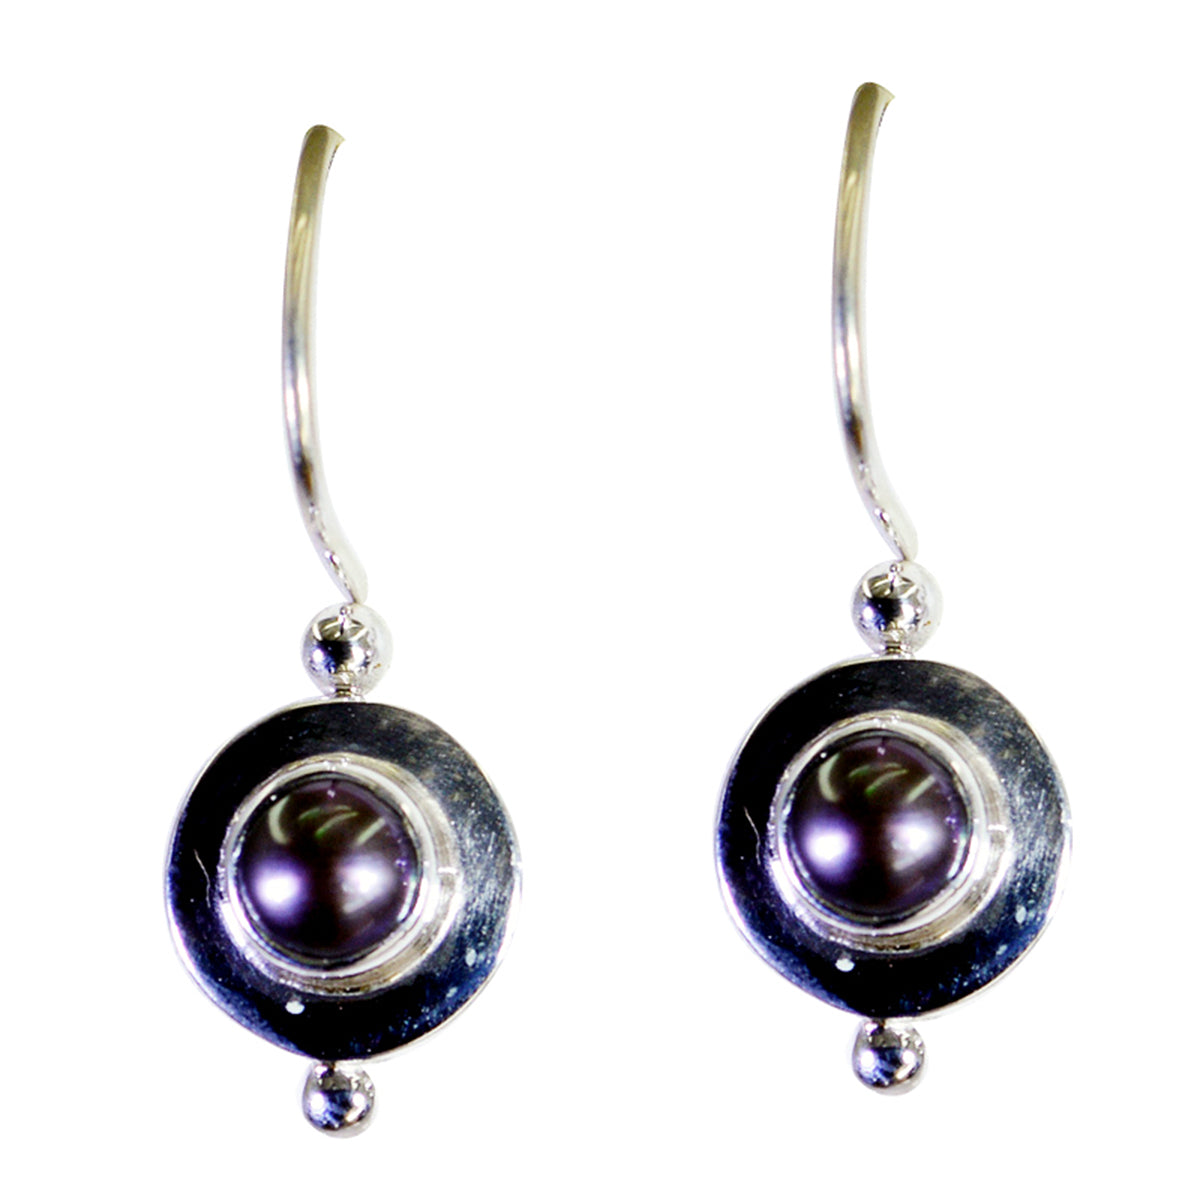 Riyo Nice Gemstone round Cabochon Black Peral Silver Earrings gift for Faishonable day